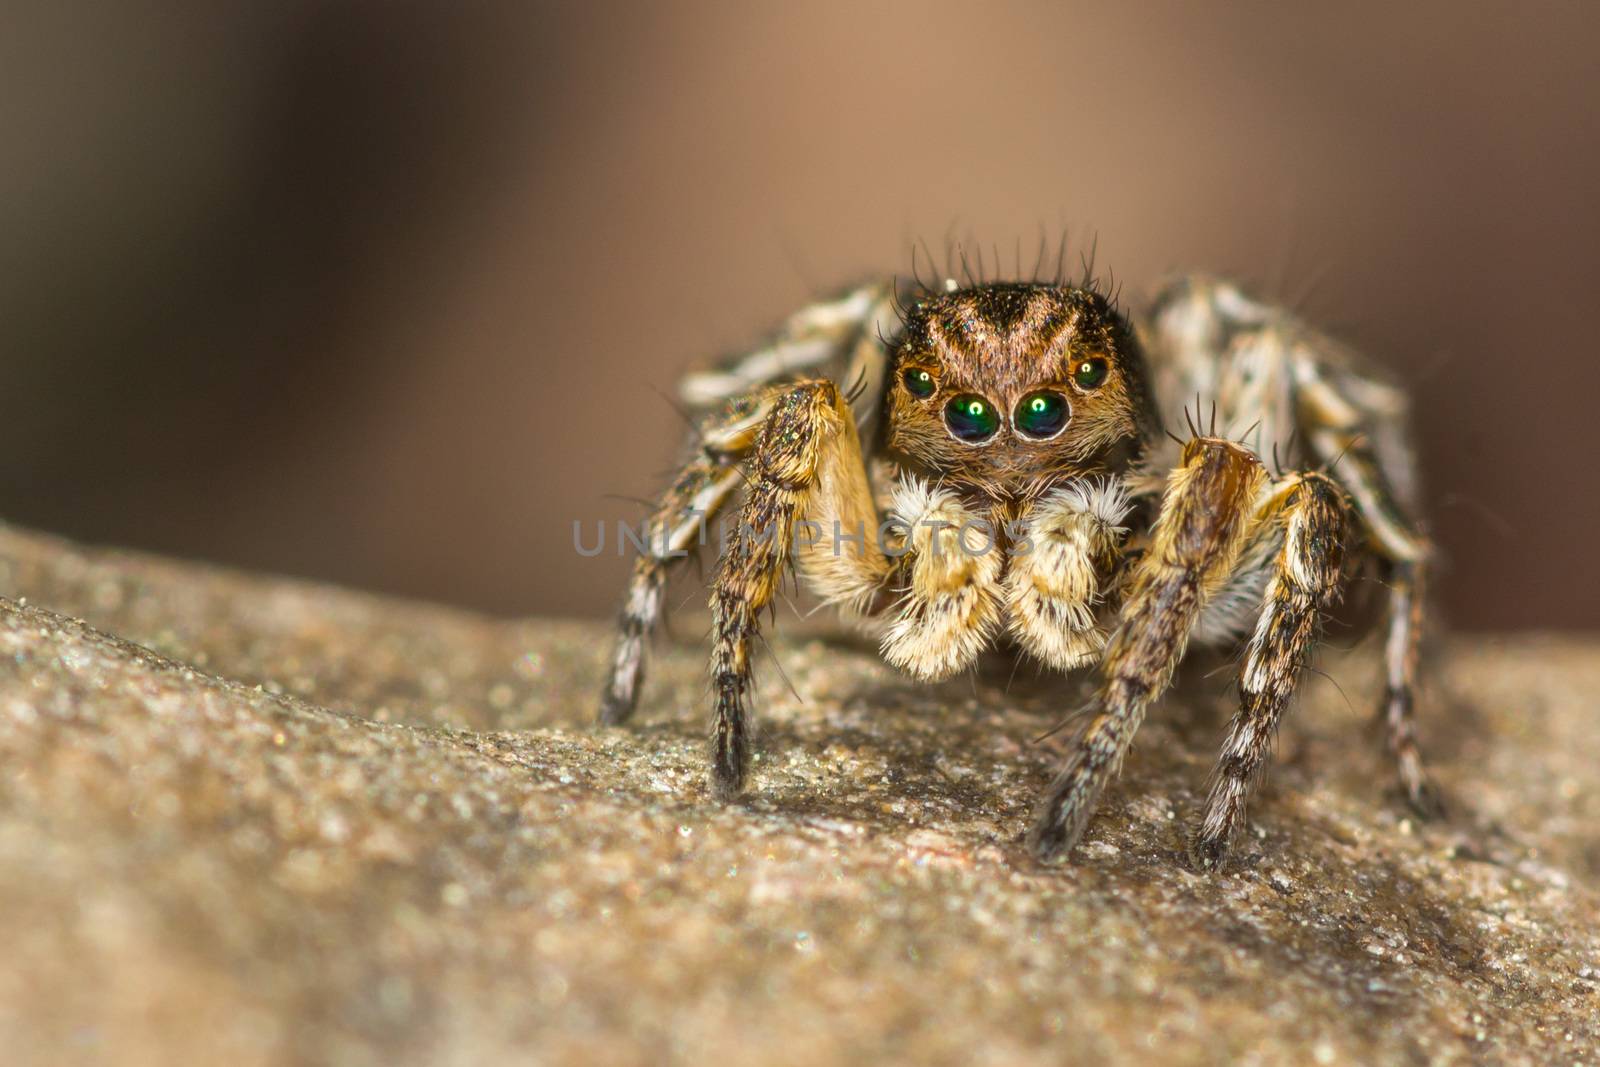 This spider is known to eat small insects like grasshoppers, flies, bees as well as other small spiders.